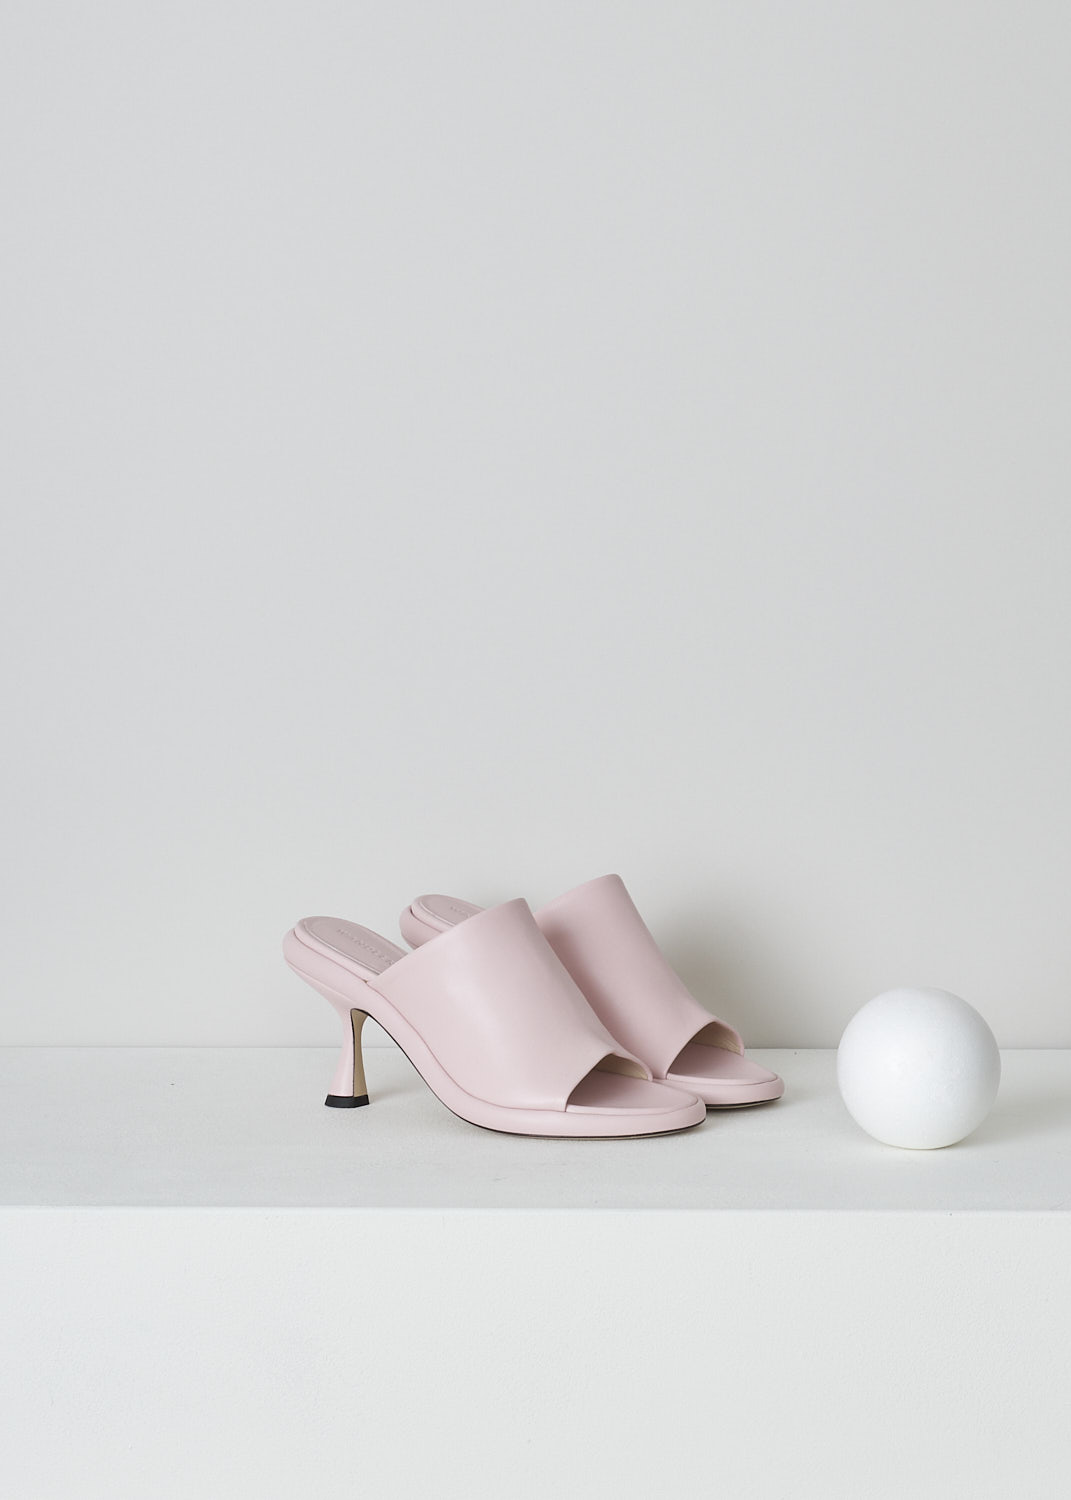 WANDLER, JUNE PLATFORM PUMPS IN SOFT PINK, 23202_871201_1862, Pink, Front, These soft pink heeled slip-on mules have a broad strap across the vamp, a rounded open-toe and a platform sole. The slip-on mules have a mid-height spool heel.

